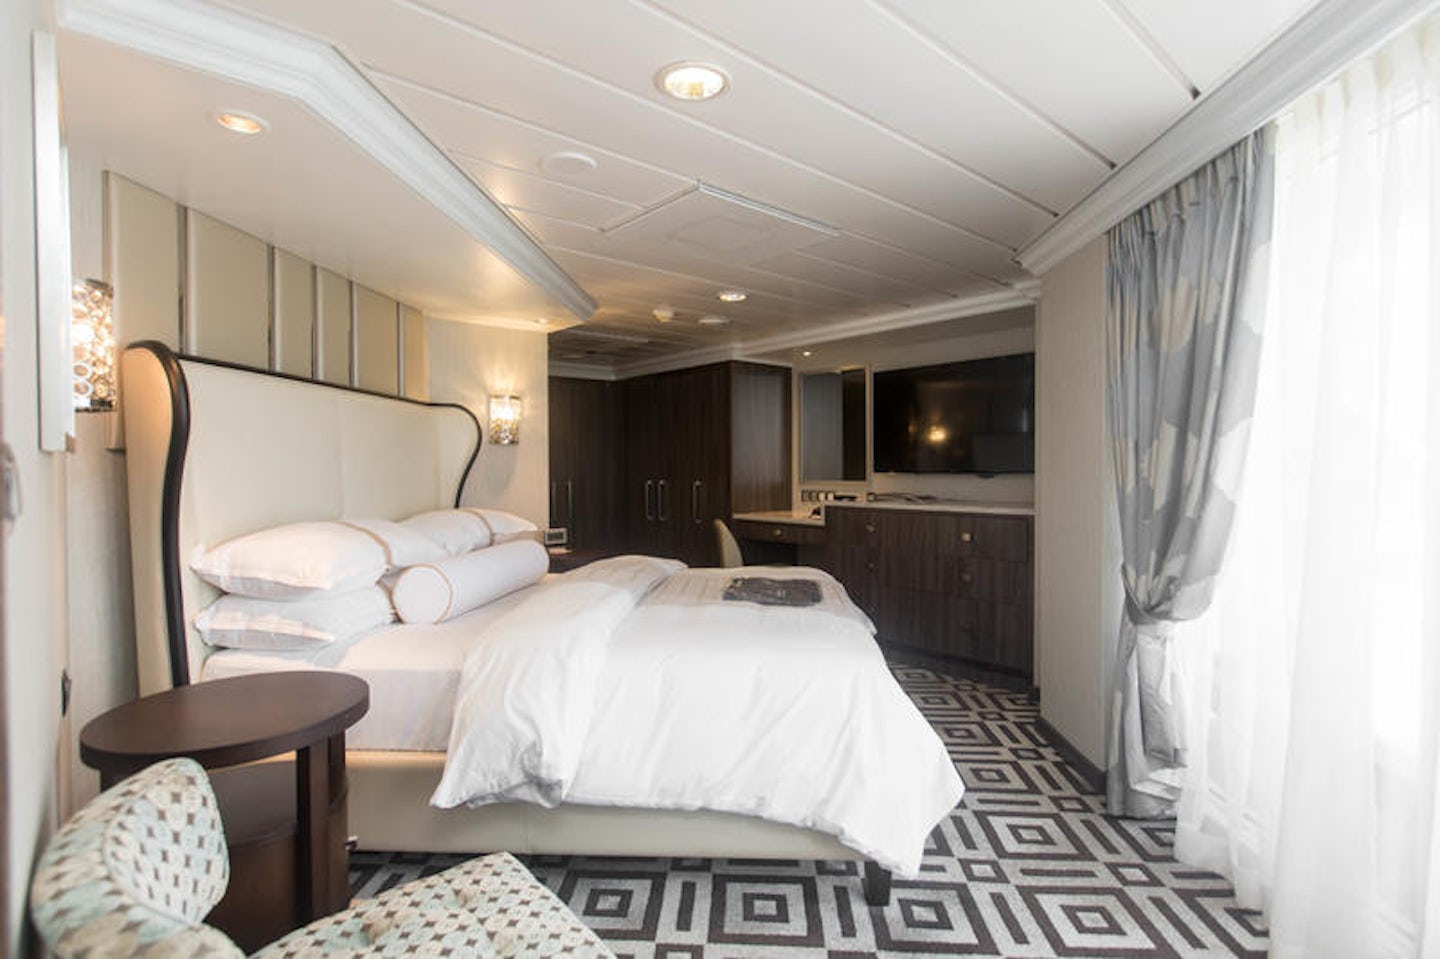 The Club World Owner's Suite on Azamara Journey